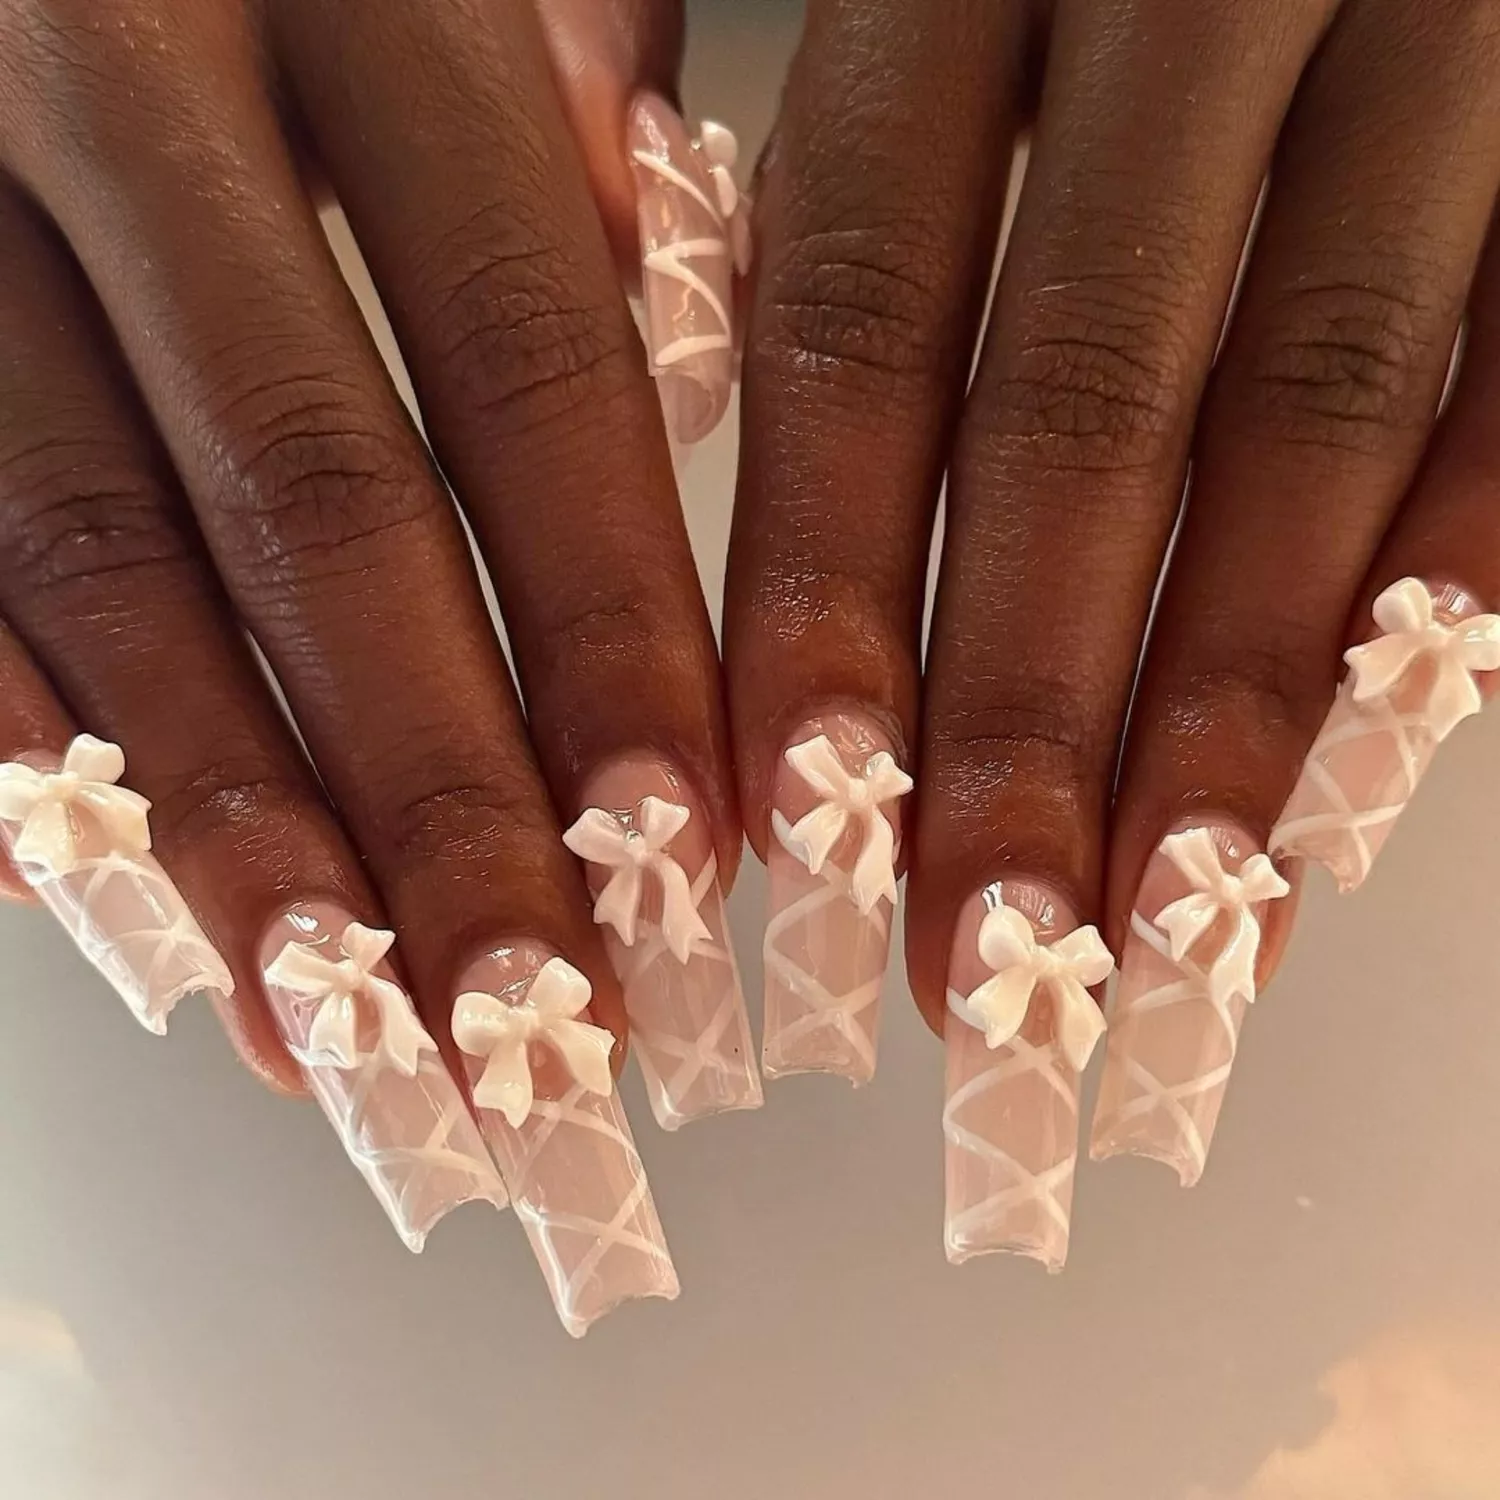 27 Long Nail Ideas For a Statement-Making Mani